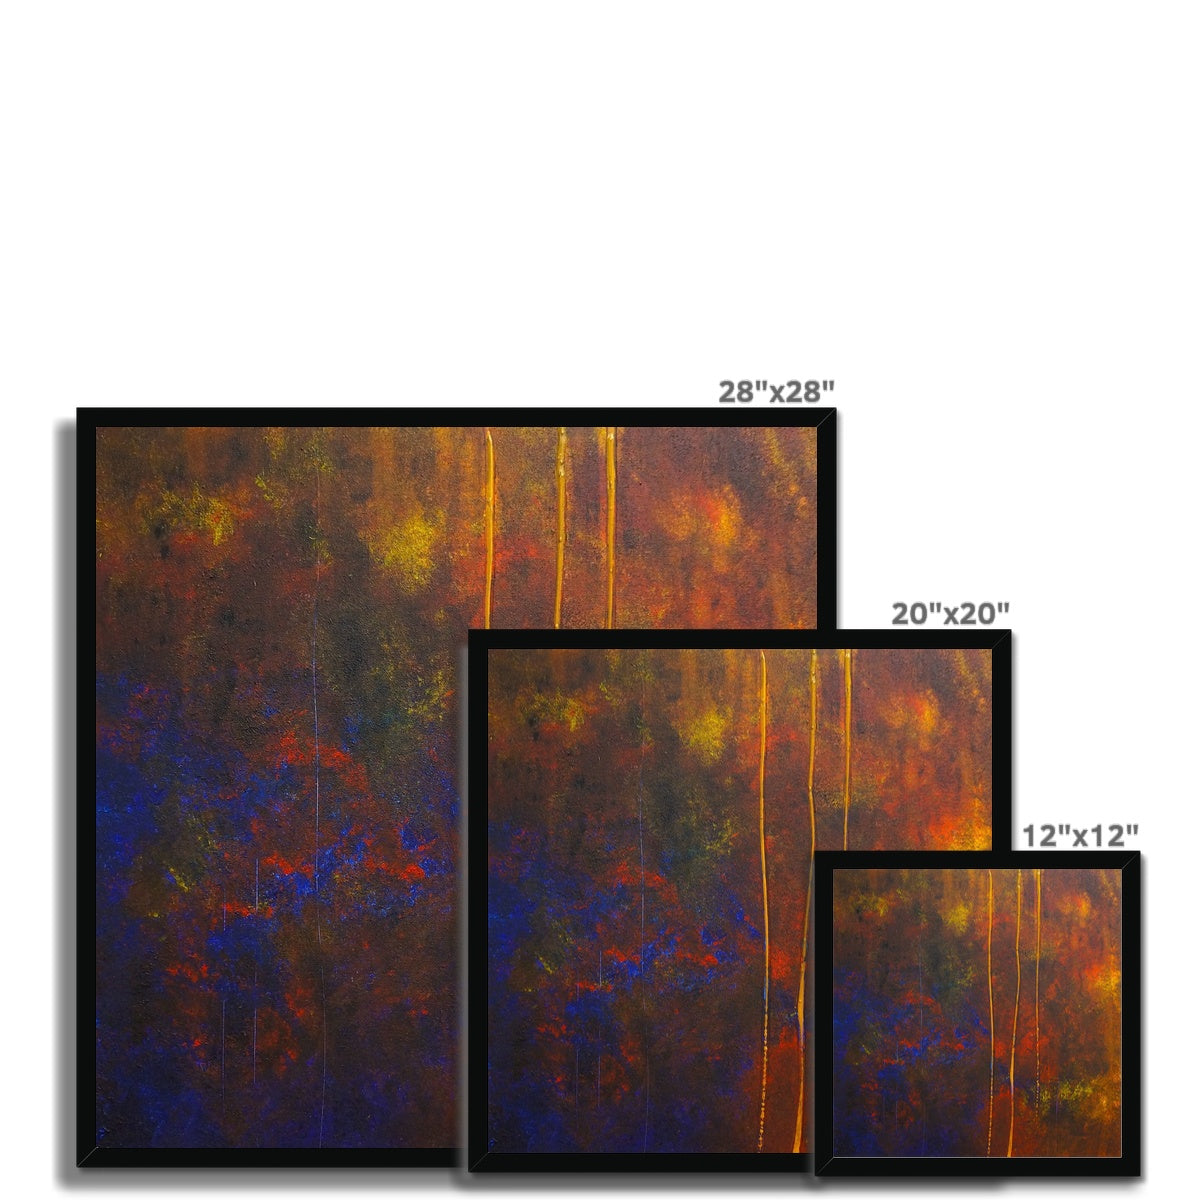 The Autumn Wood Abstract Painting | Framed Prints From Scotland-Framed Prints-Abstract & Impressionistic Art Gallery-Paintings, Prints, Homeware, Art Gifts From Scotland By Scottish Artist Kevin Hunter